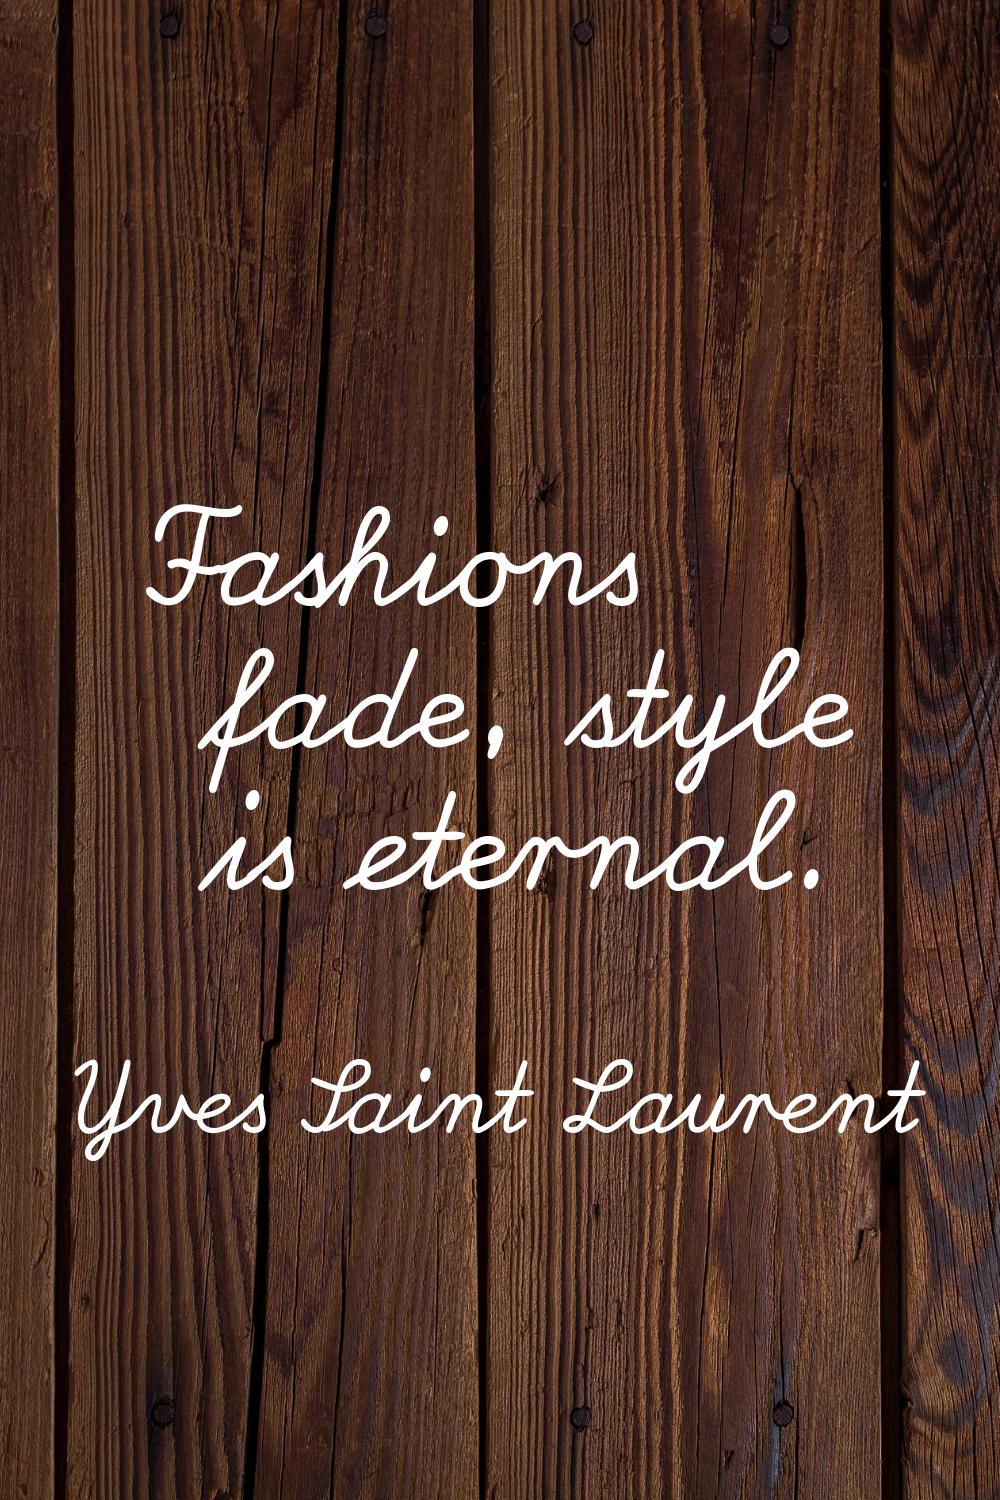 Fashions fade, style is eternal.